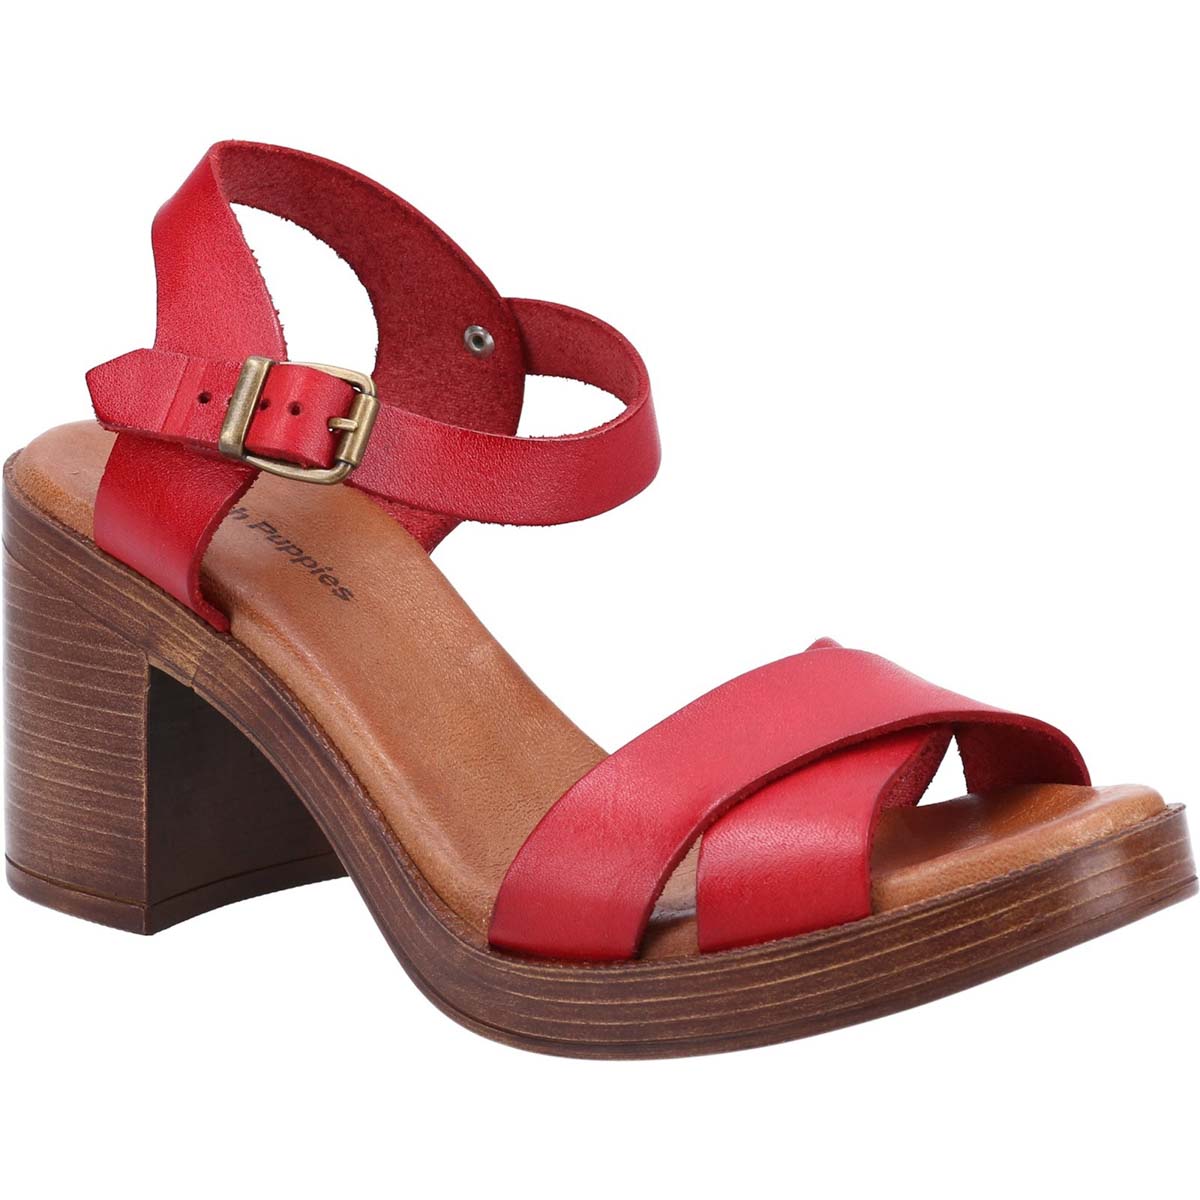 Hush Puppies Georgia Red Womens Heeled Sandals 31949-58345 in a Plain Leather in Size 7